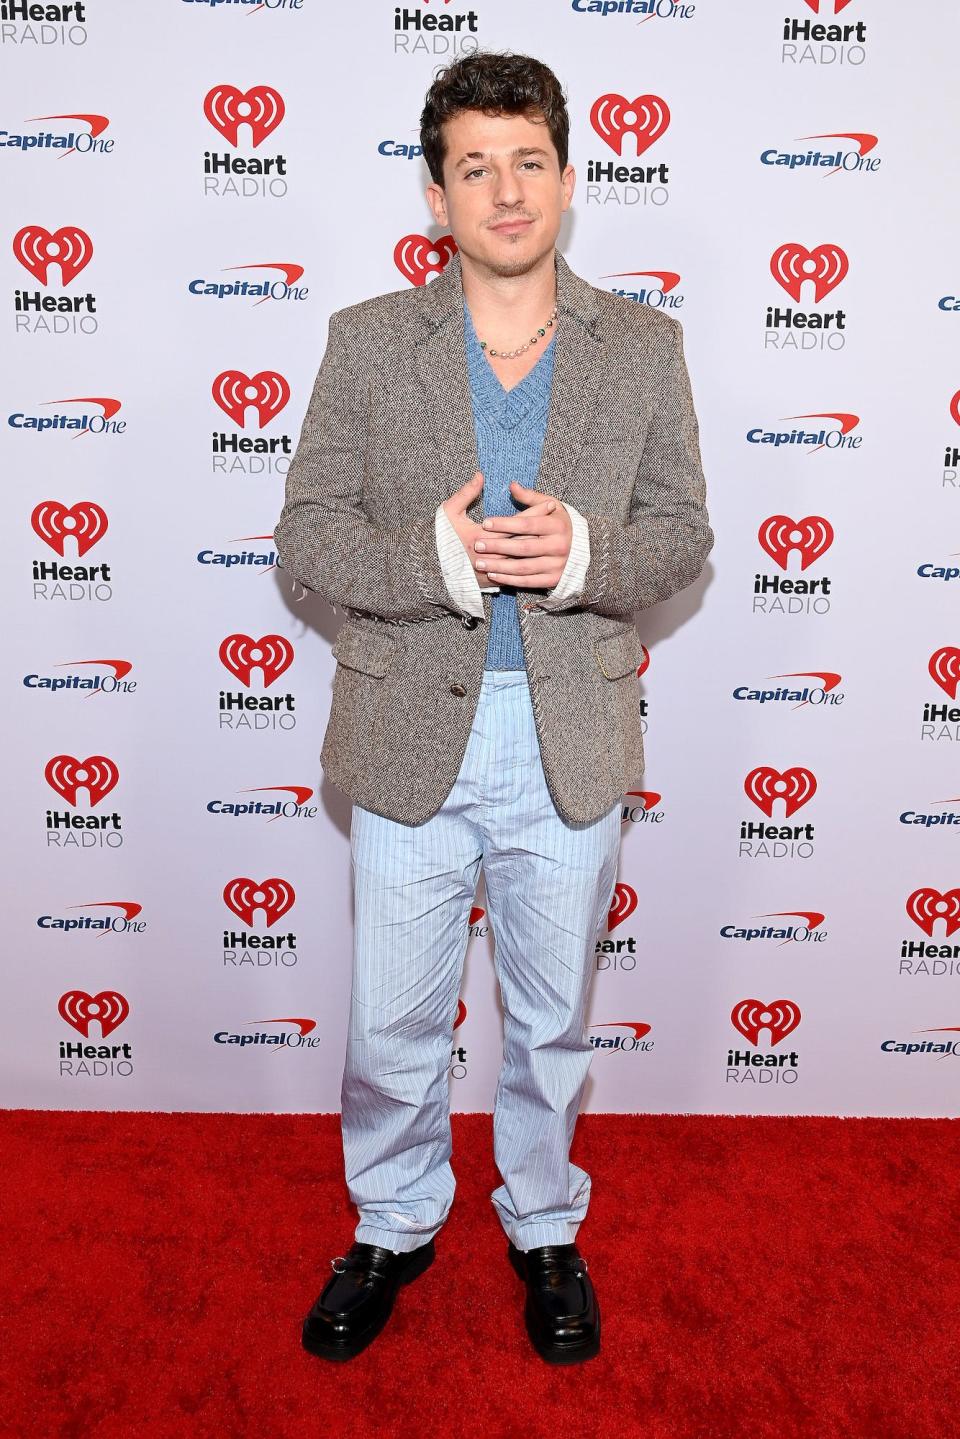 Charlie Puth at Z100's iHeartRadio Jingle Ball in New York City on December 9, 2022.